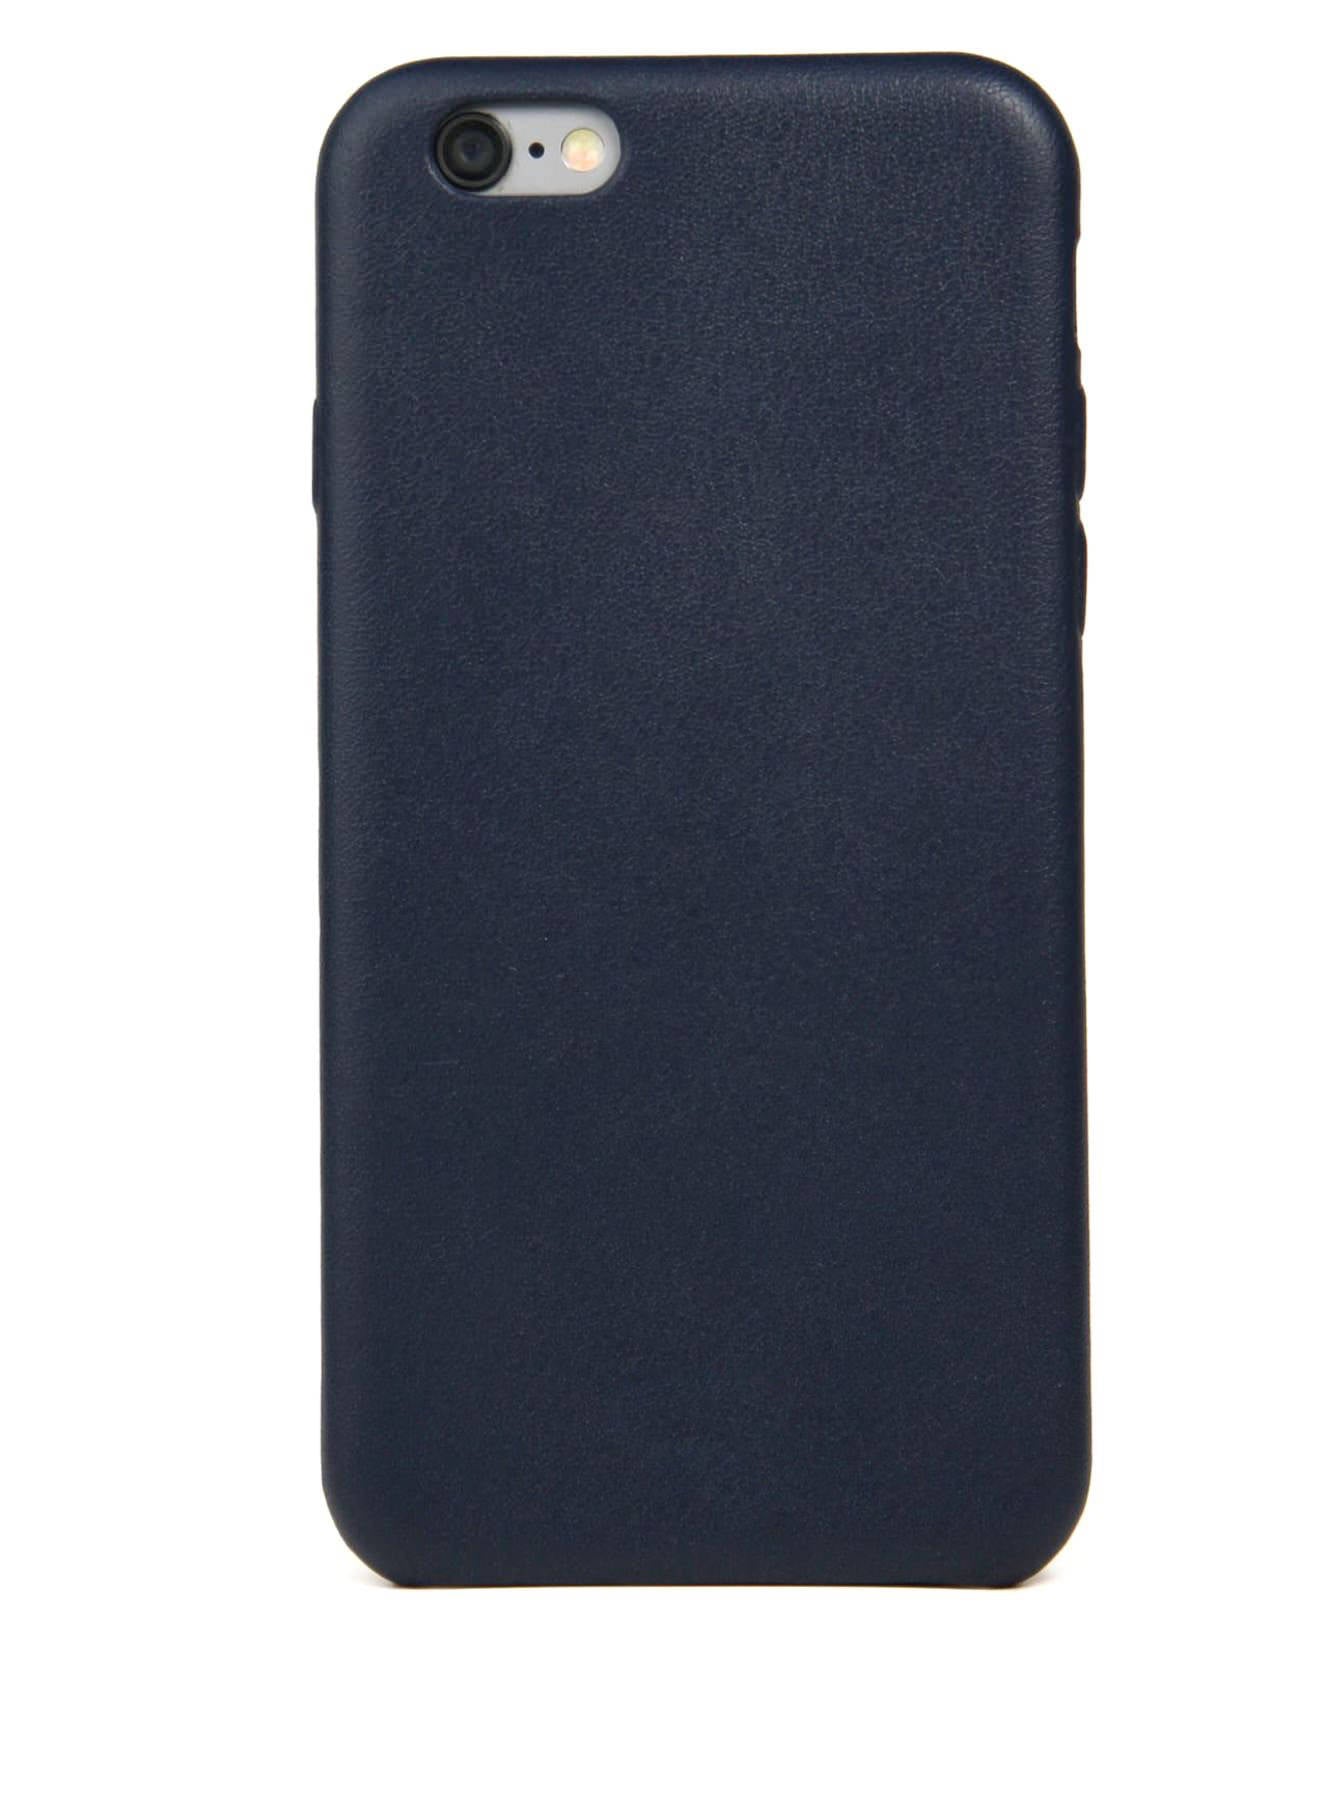 iPhone 6 Case, Navy Leather